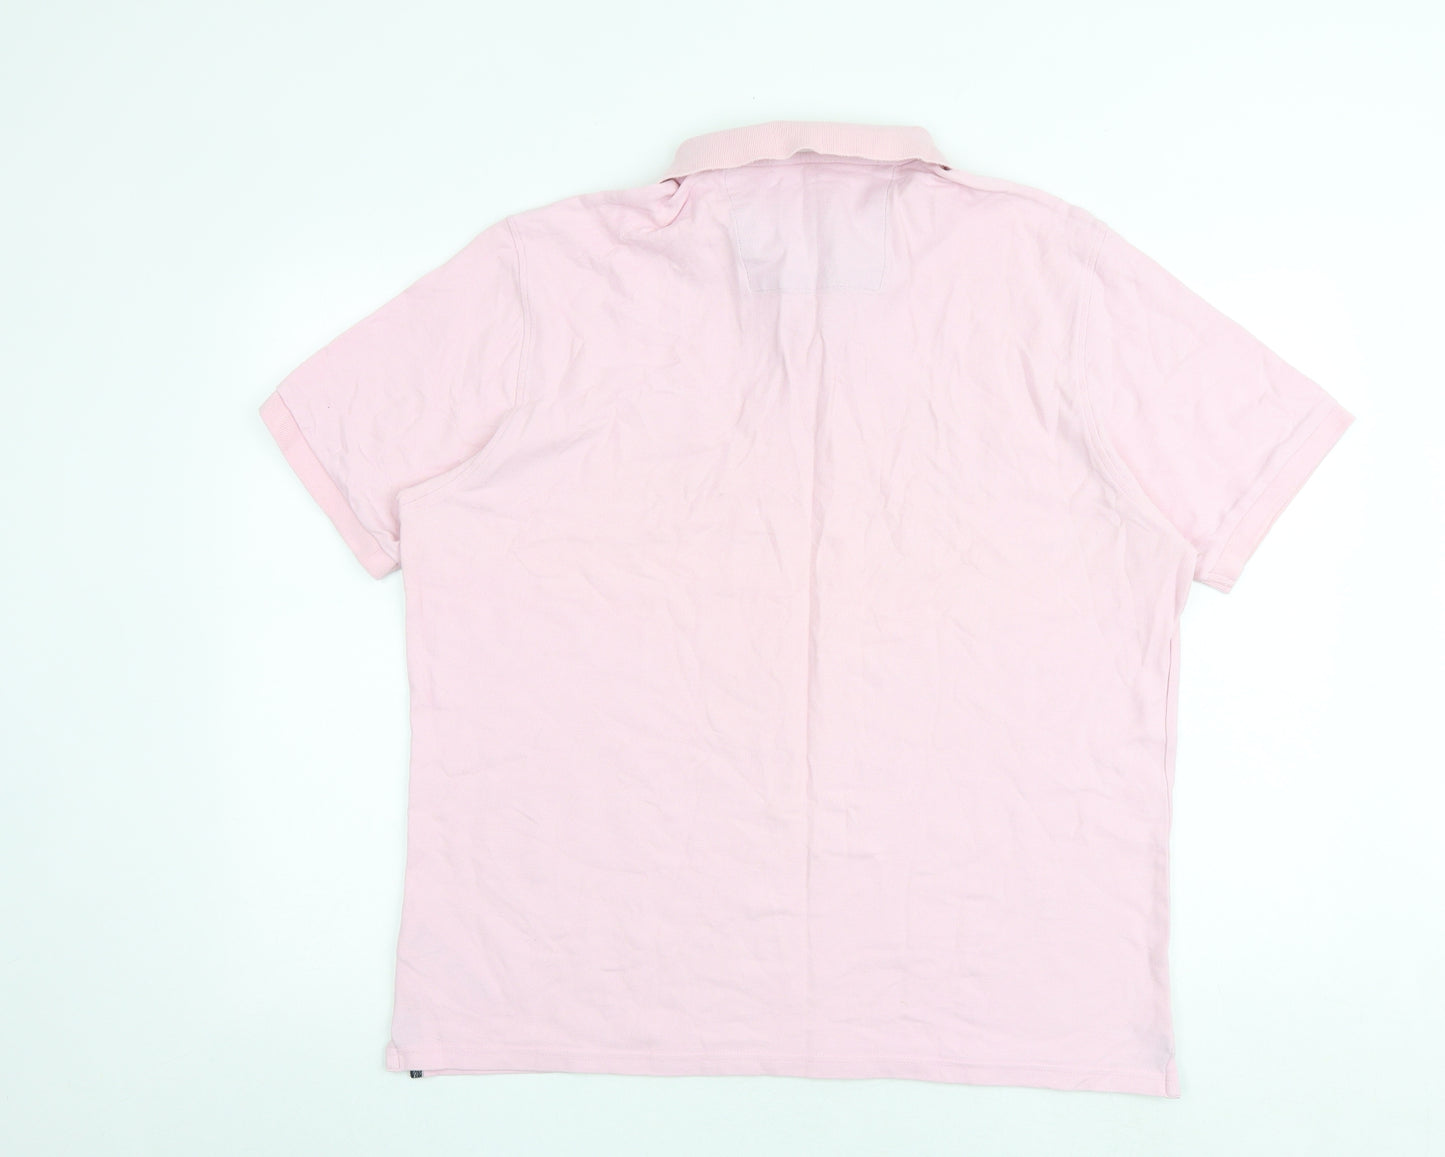 Blue Harbour Mens Pink 100% Cotton Polo Size XL Collared Button